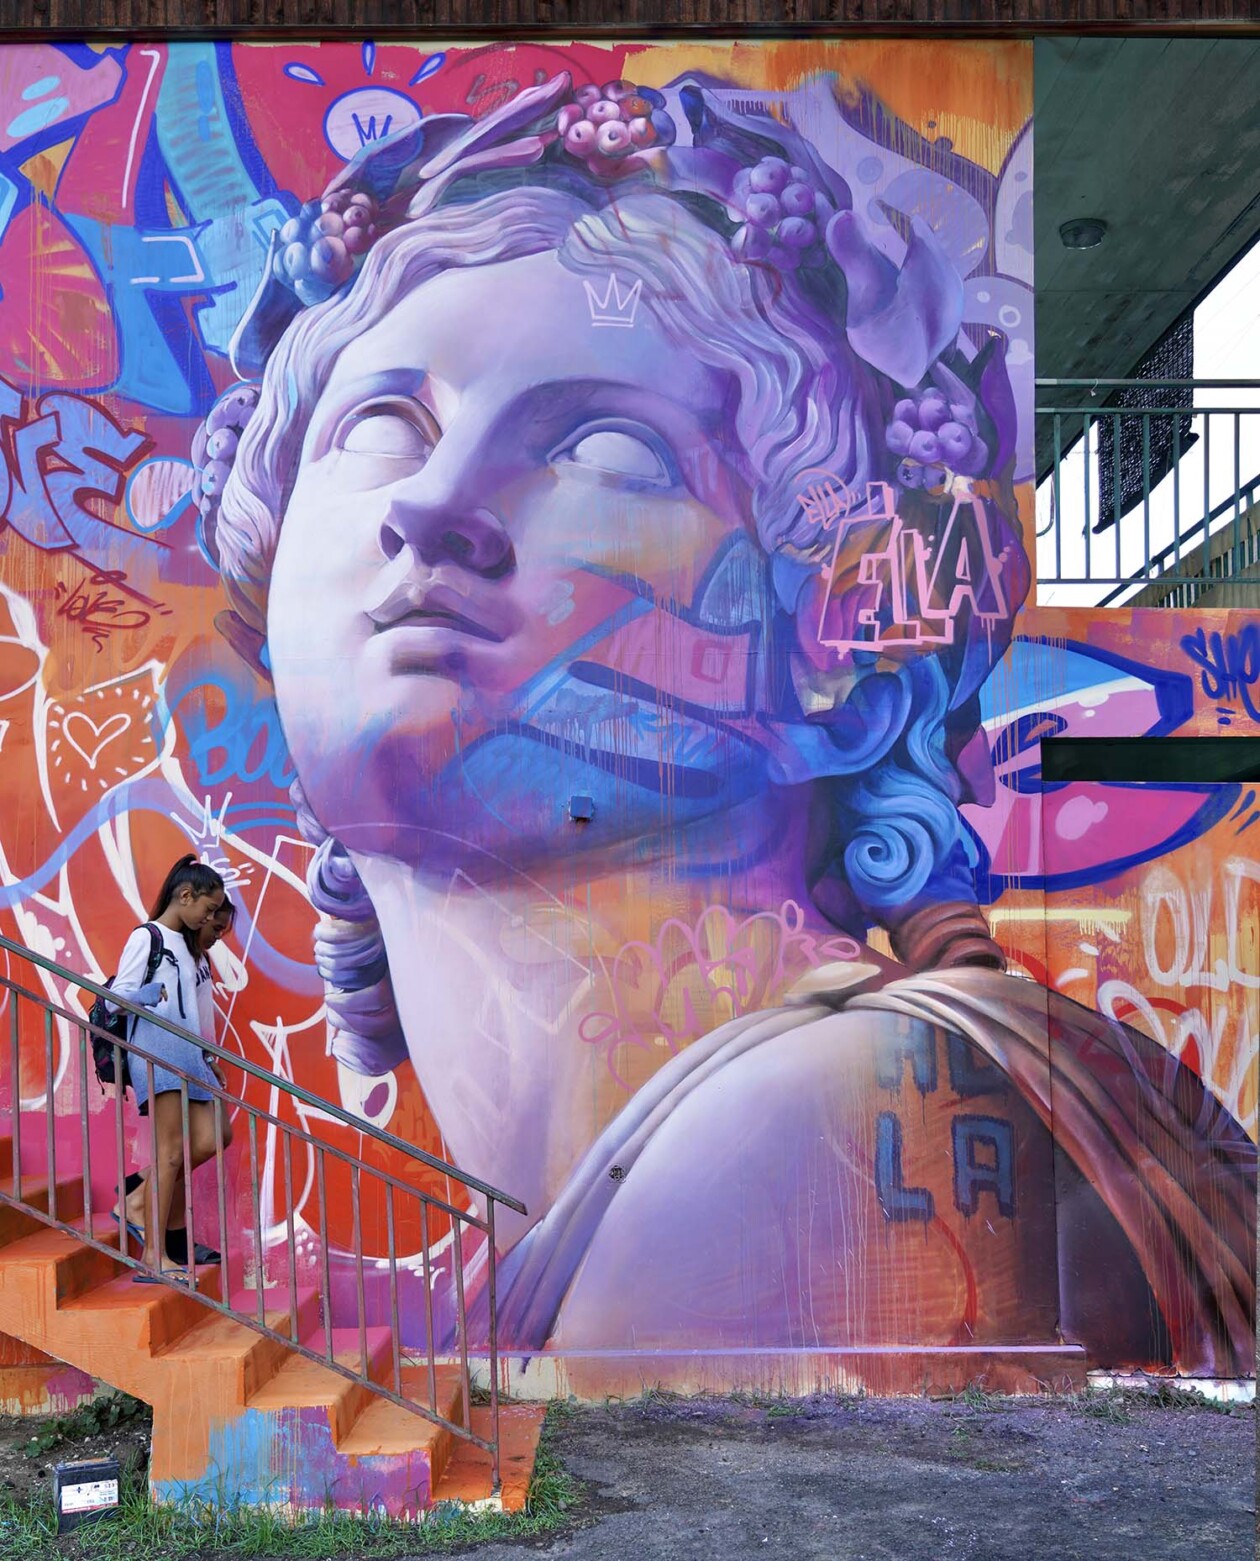 Impressive Monumental Murals That Blend Classical Figures And Graffiti By Pichiavo (15)